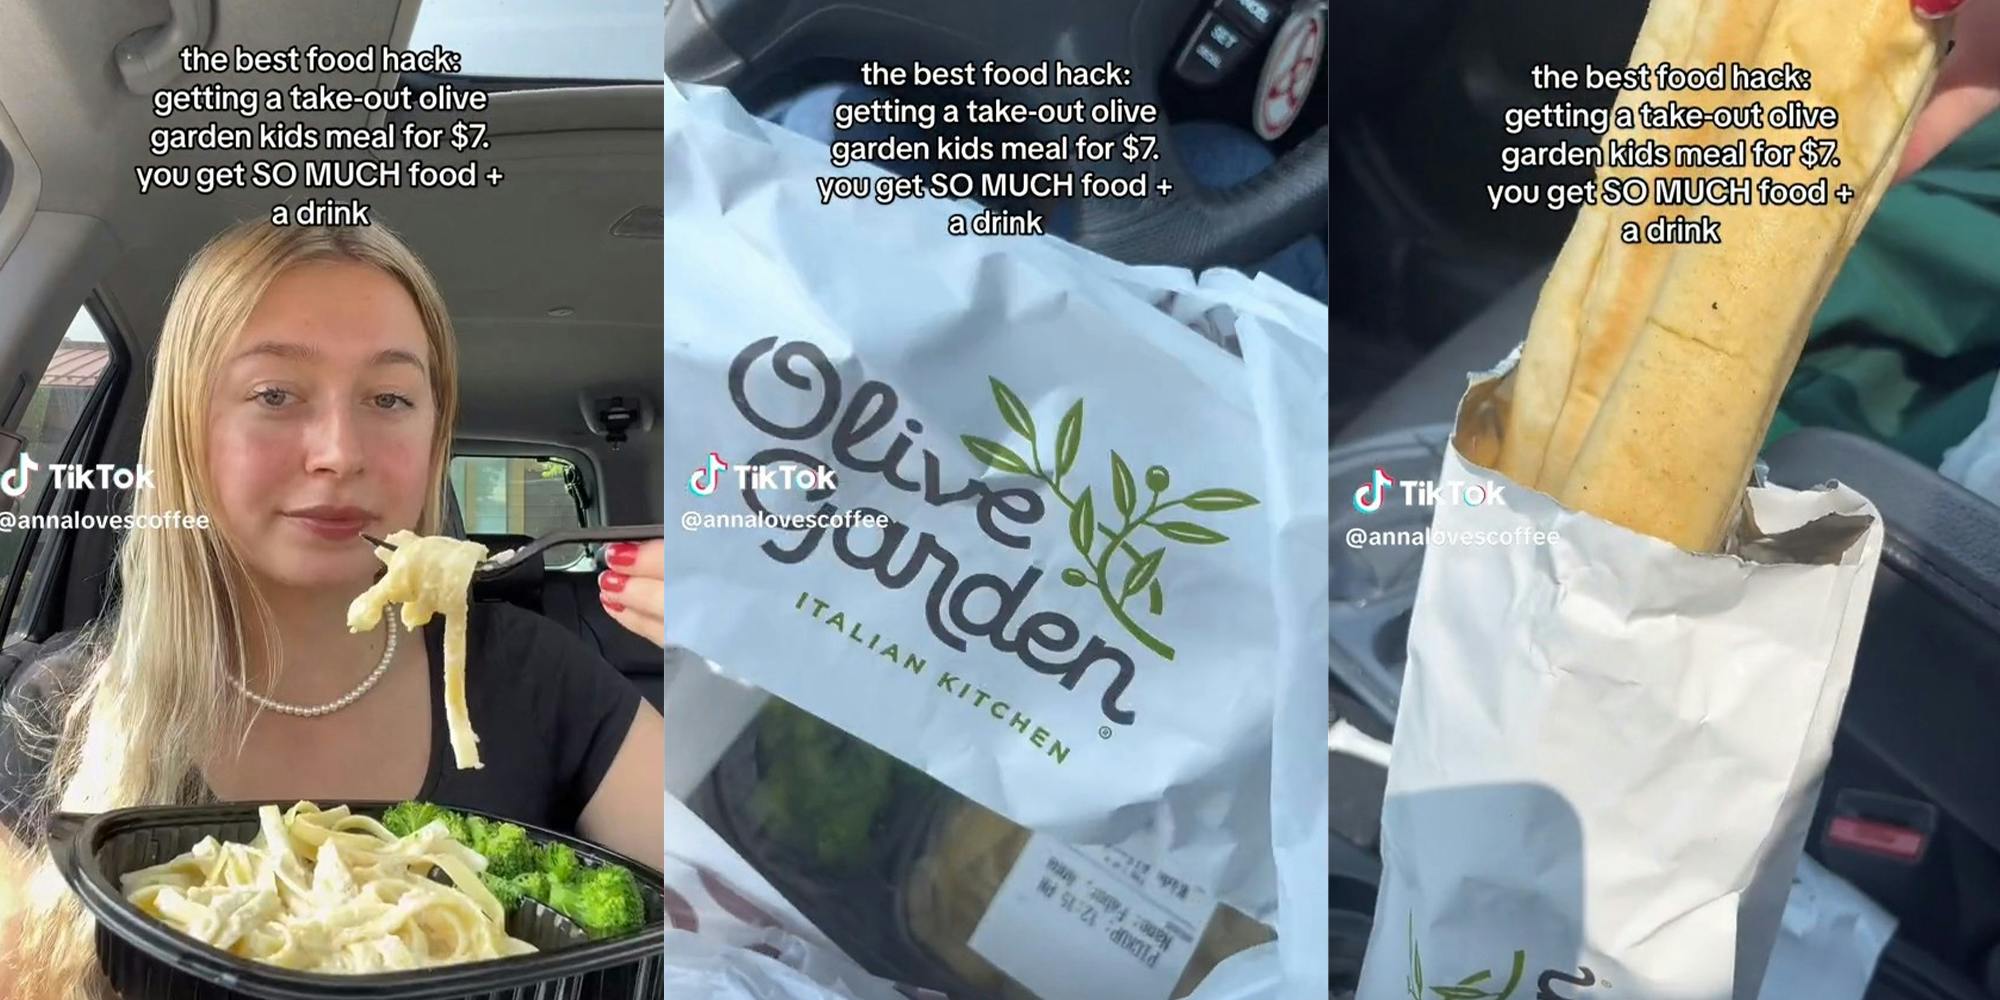 Woman holding eating olive garden food in a vehicle